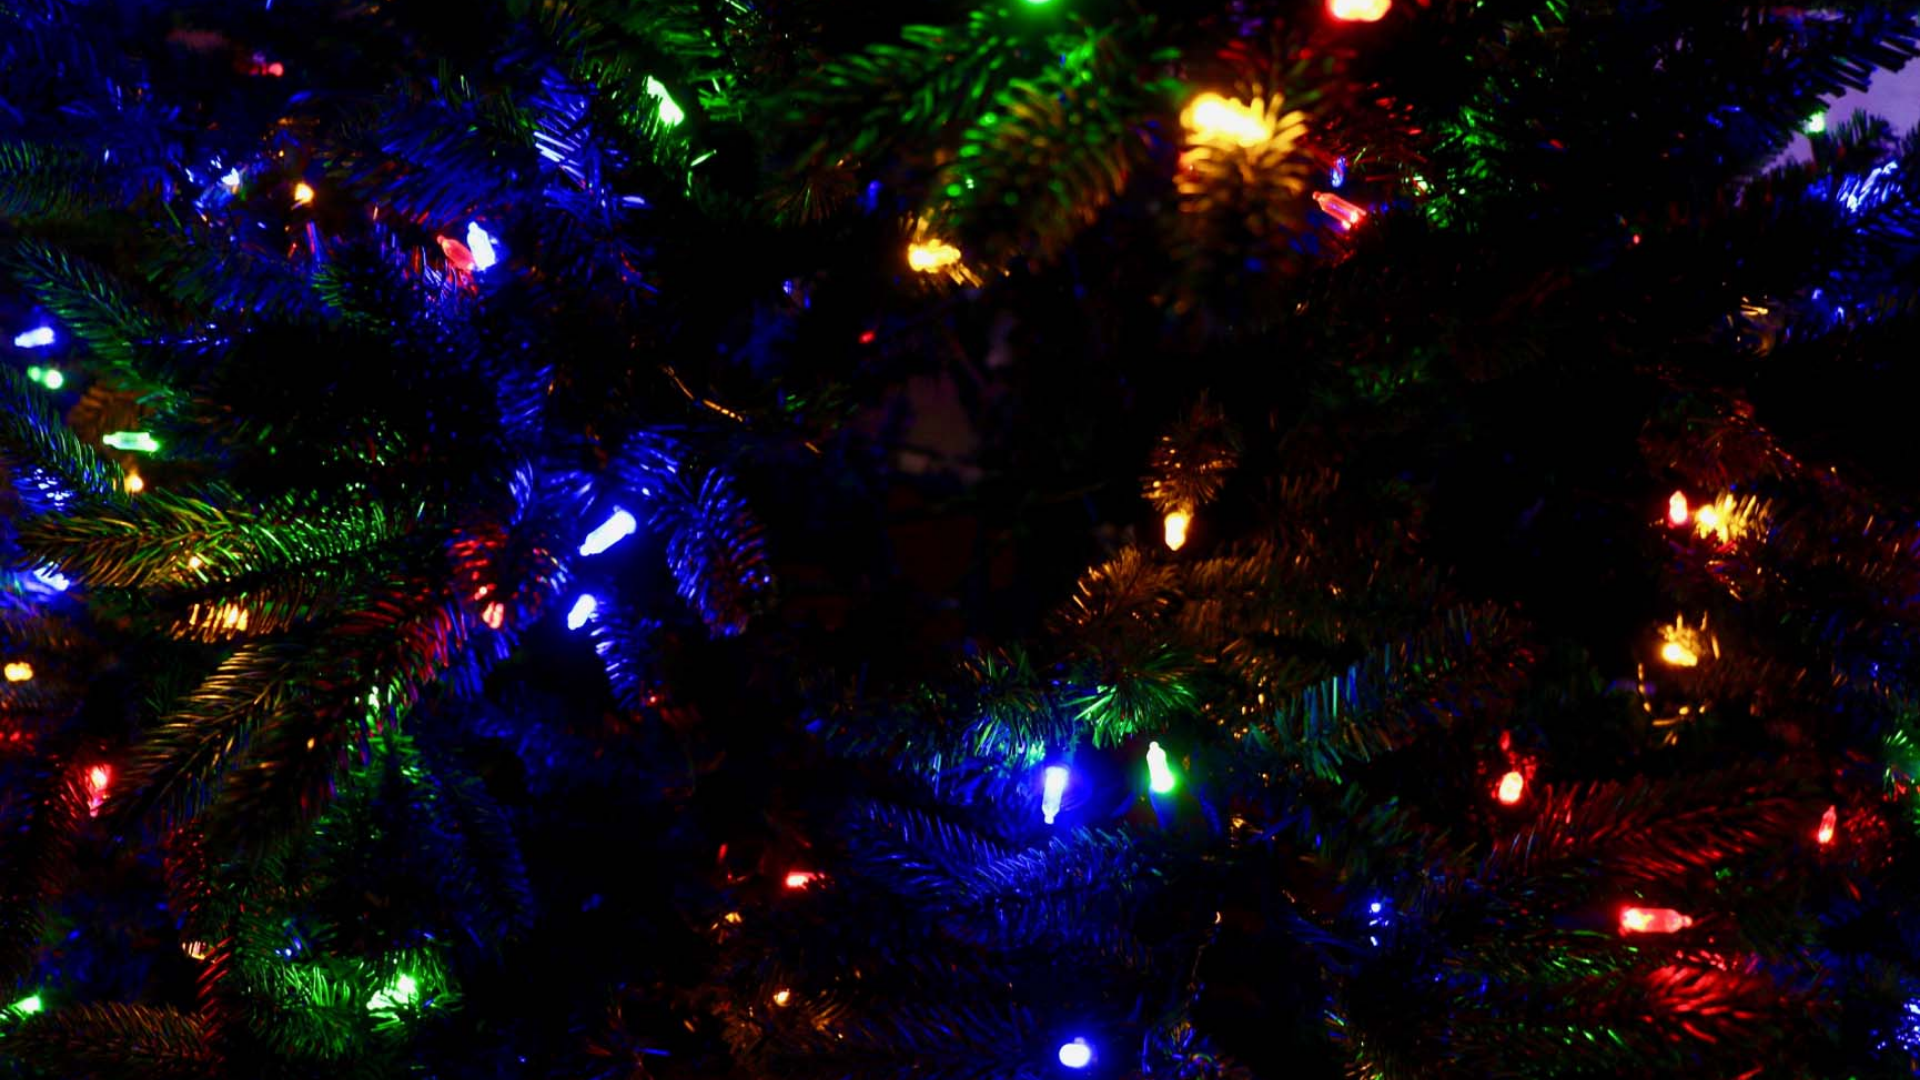 Christmas lights background for your Online Meetings